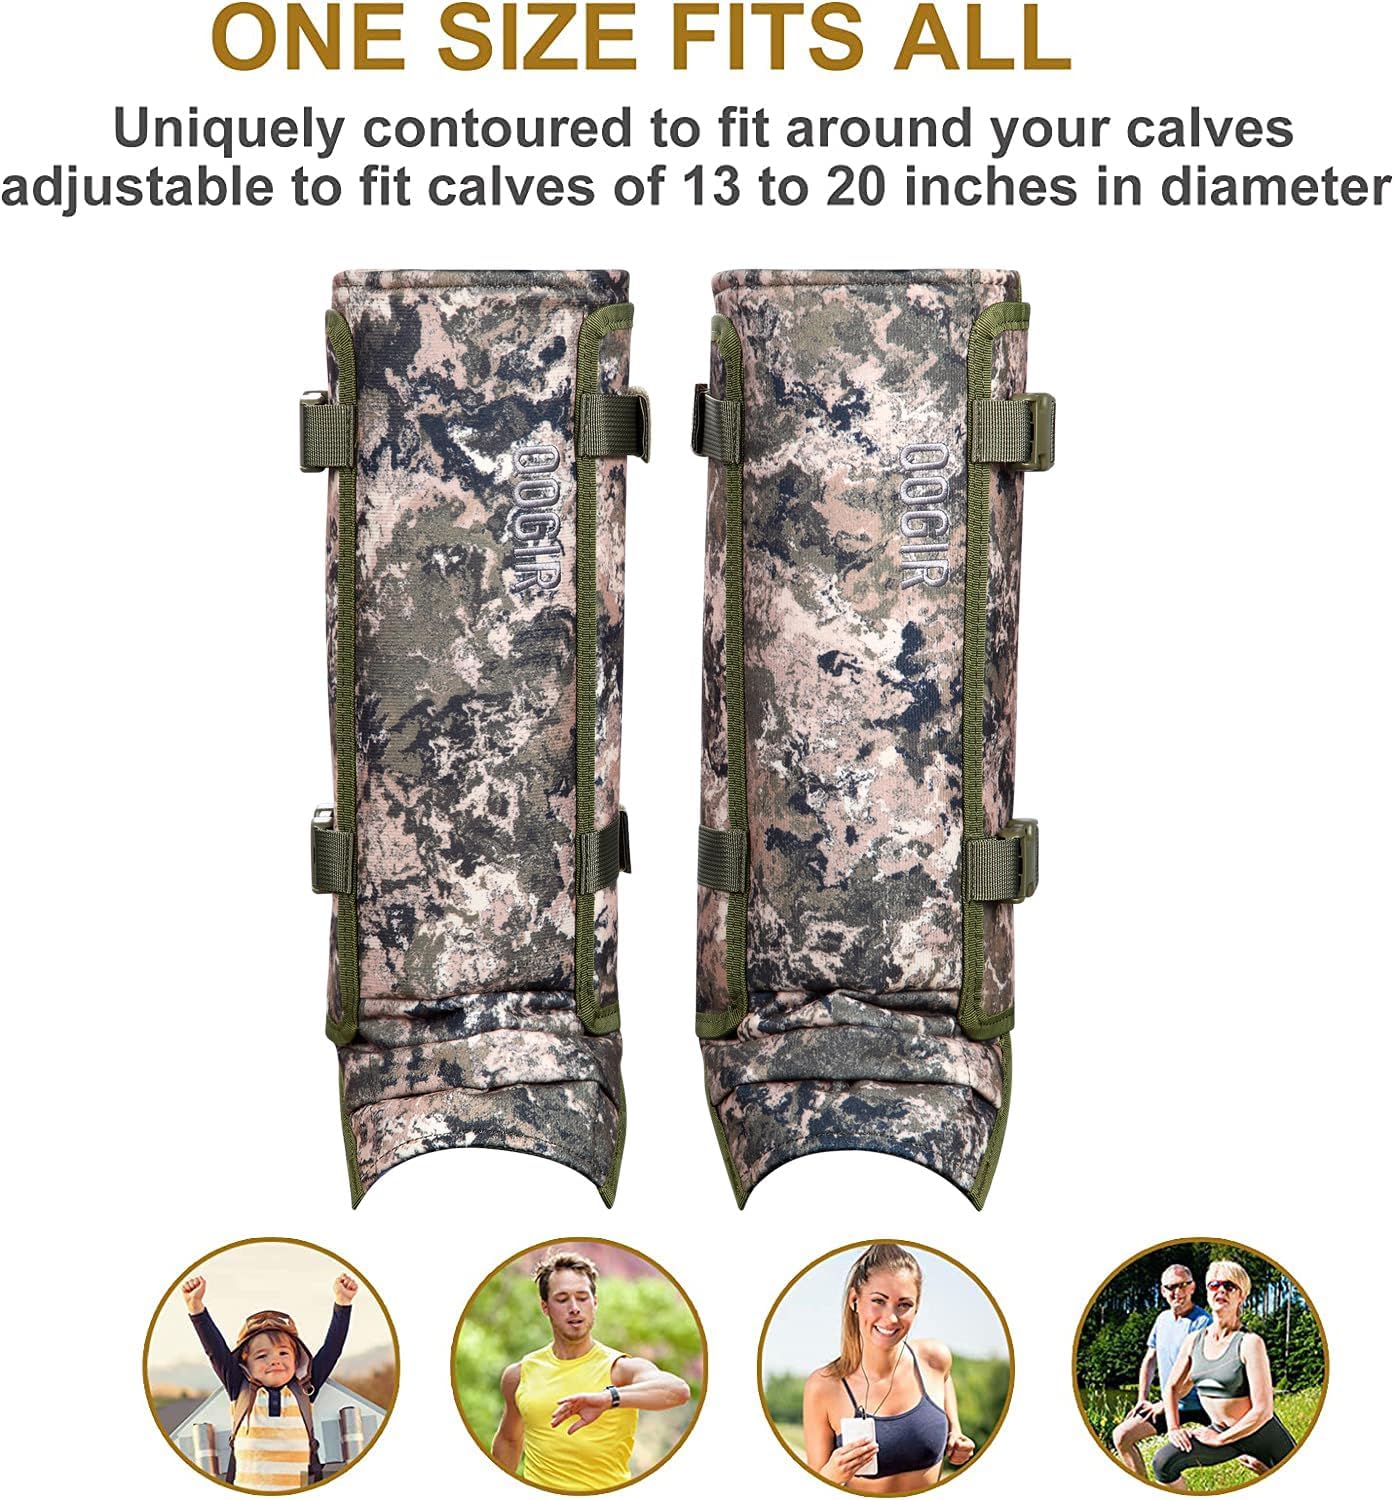 skiguard Snake Guard Snake Gaiters, Waterproof Snake Chaps for Lower Legs, Snake Bite Proof Guardz Gaiters, Snake Guardz Fit for Men & Women, Adjustable Size for Hunting Hiking and Farm